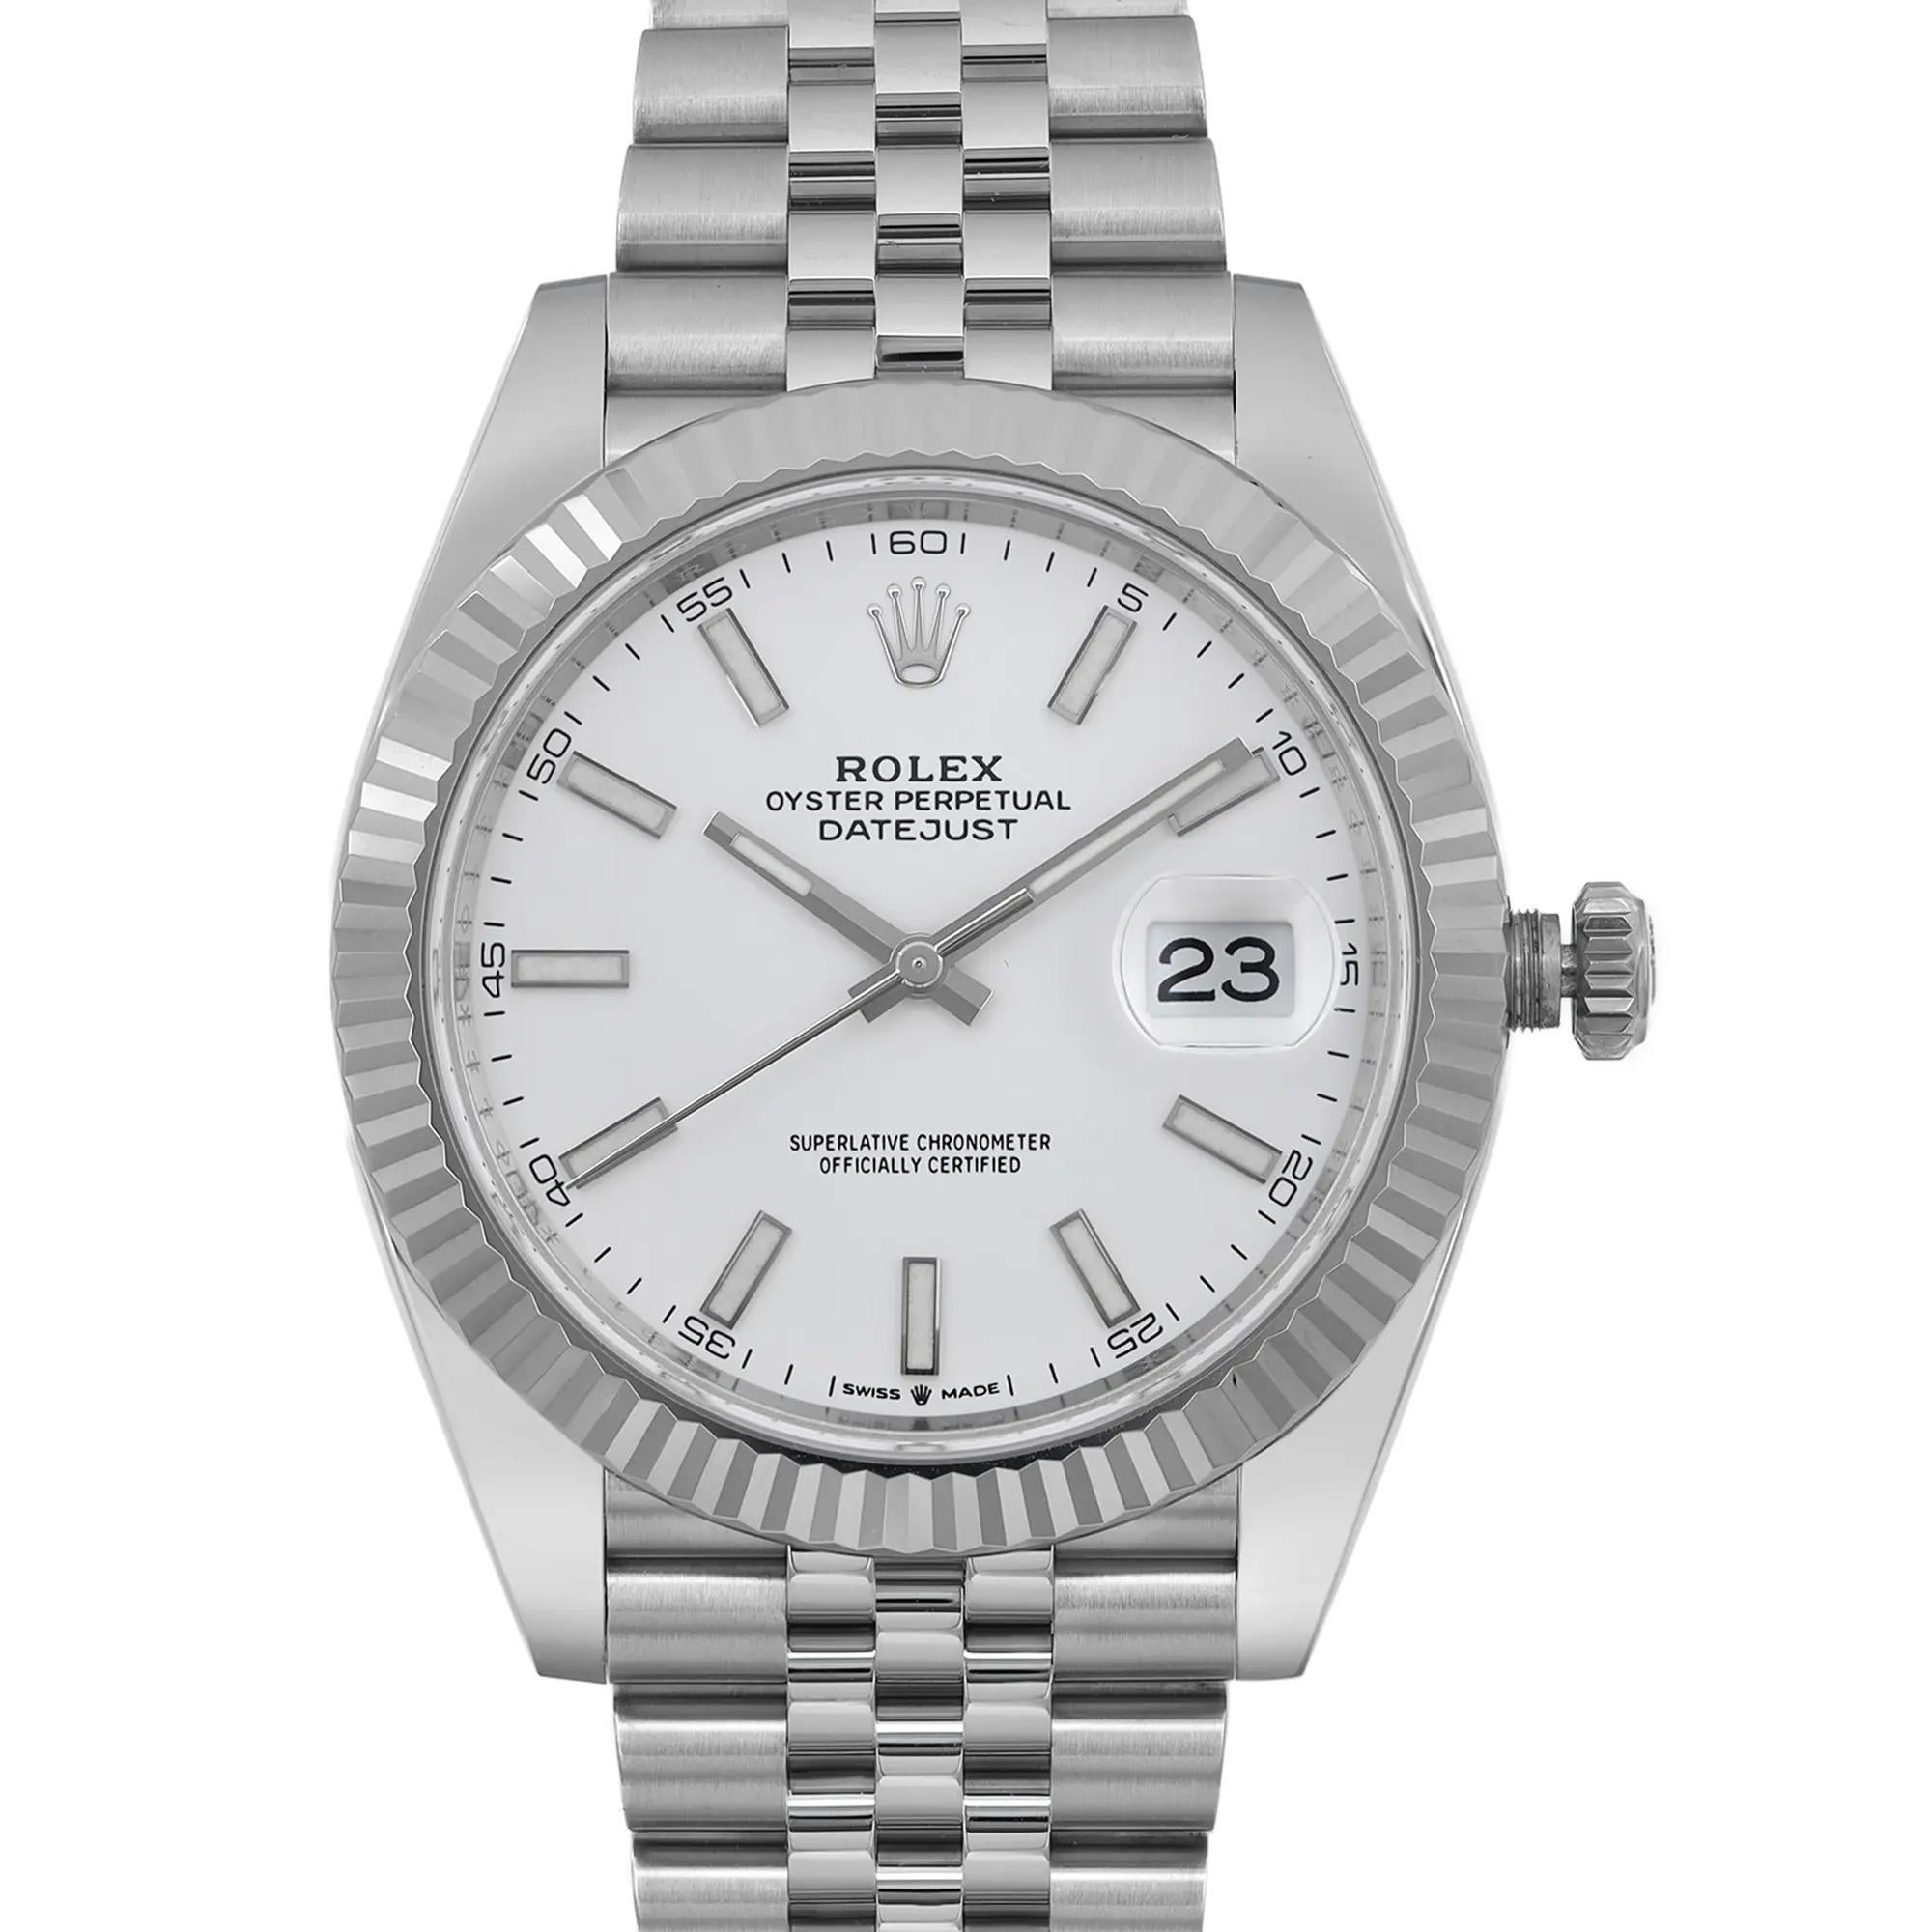 New watch. 2023 card. Comes with the original box and papers.

General Information
Brand: Rolex
Model: Datejust 126334
Type: Wristwatch
Department: Men
Style: Luxury
Vintage: No
Country/Region of Manufacture: Switzerland
Year Manufactured: